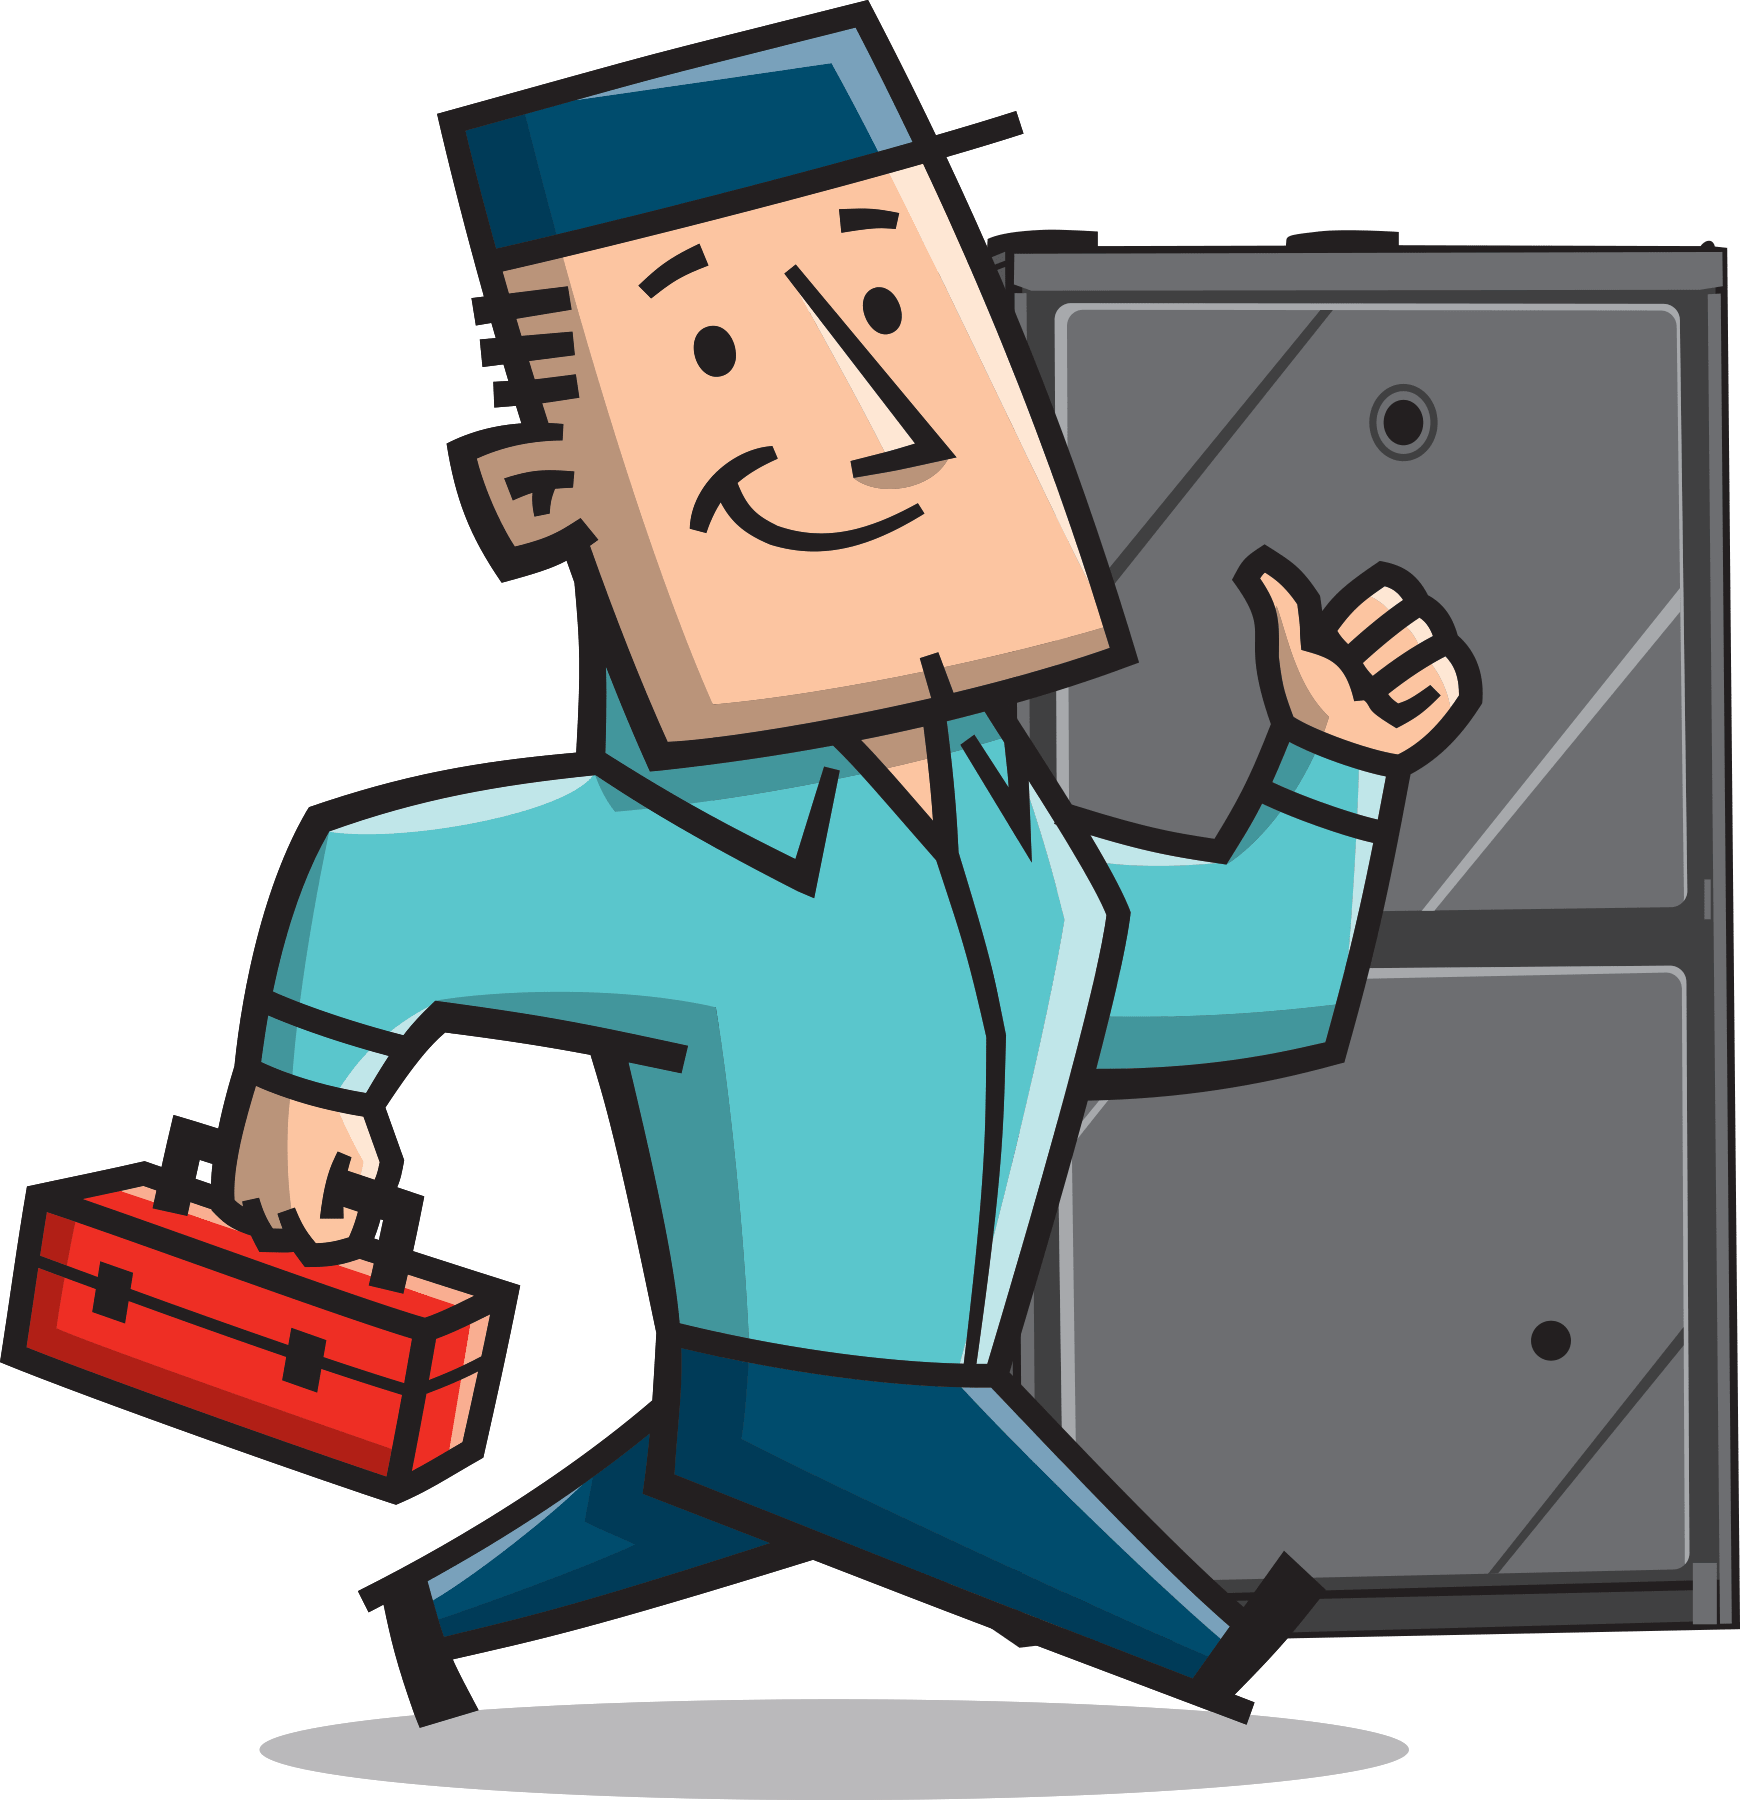 Call us for Furnace Repair repair Plainfield IL and Naperville IL.